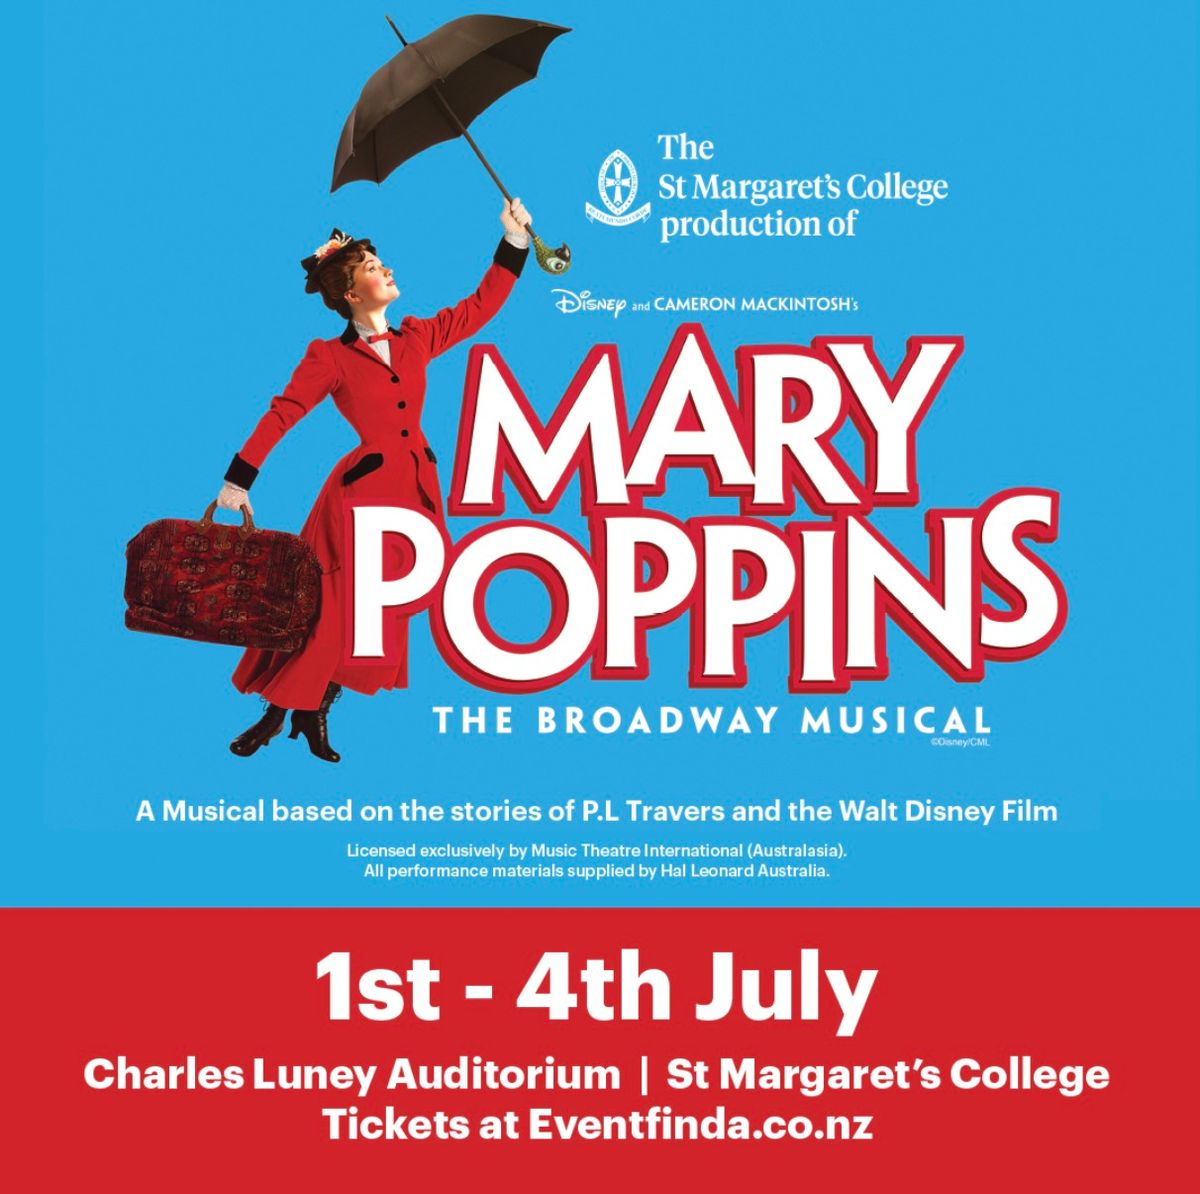 Mary Poppins The Broadway Musical